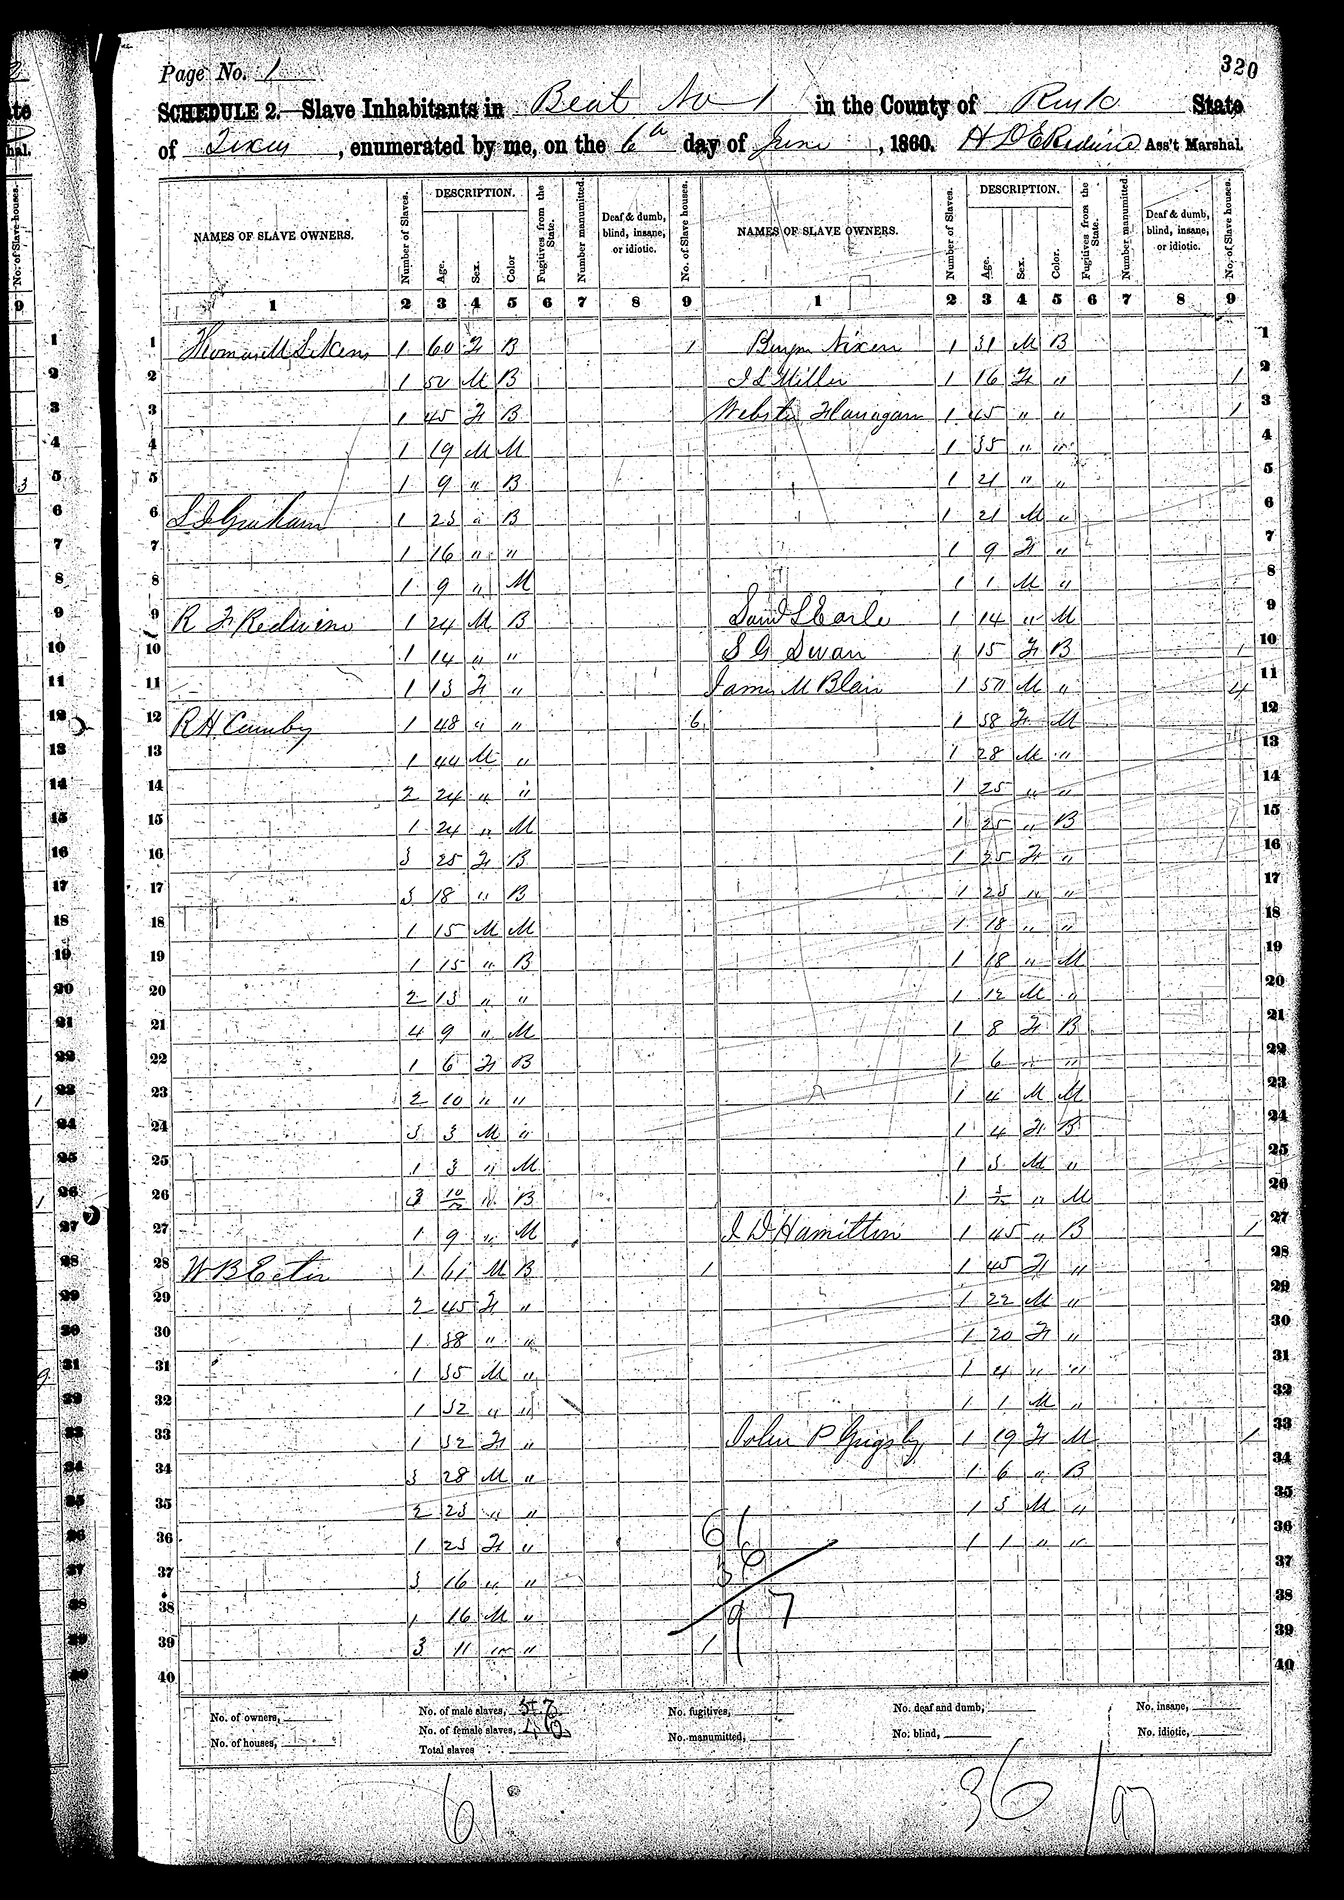 black and white image of scanned page from historic slave census with rows of handwritten entries.